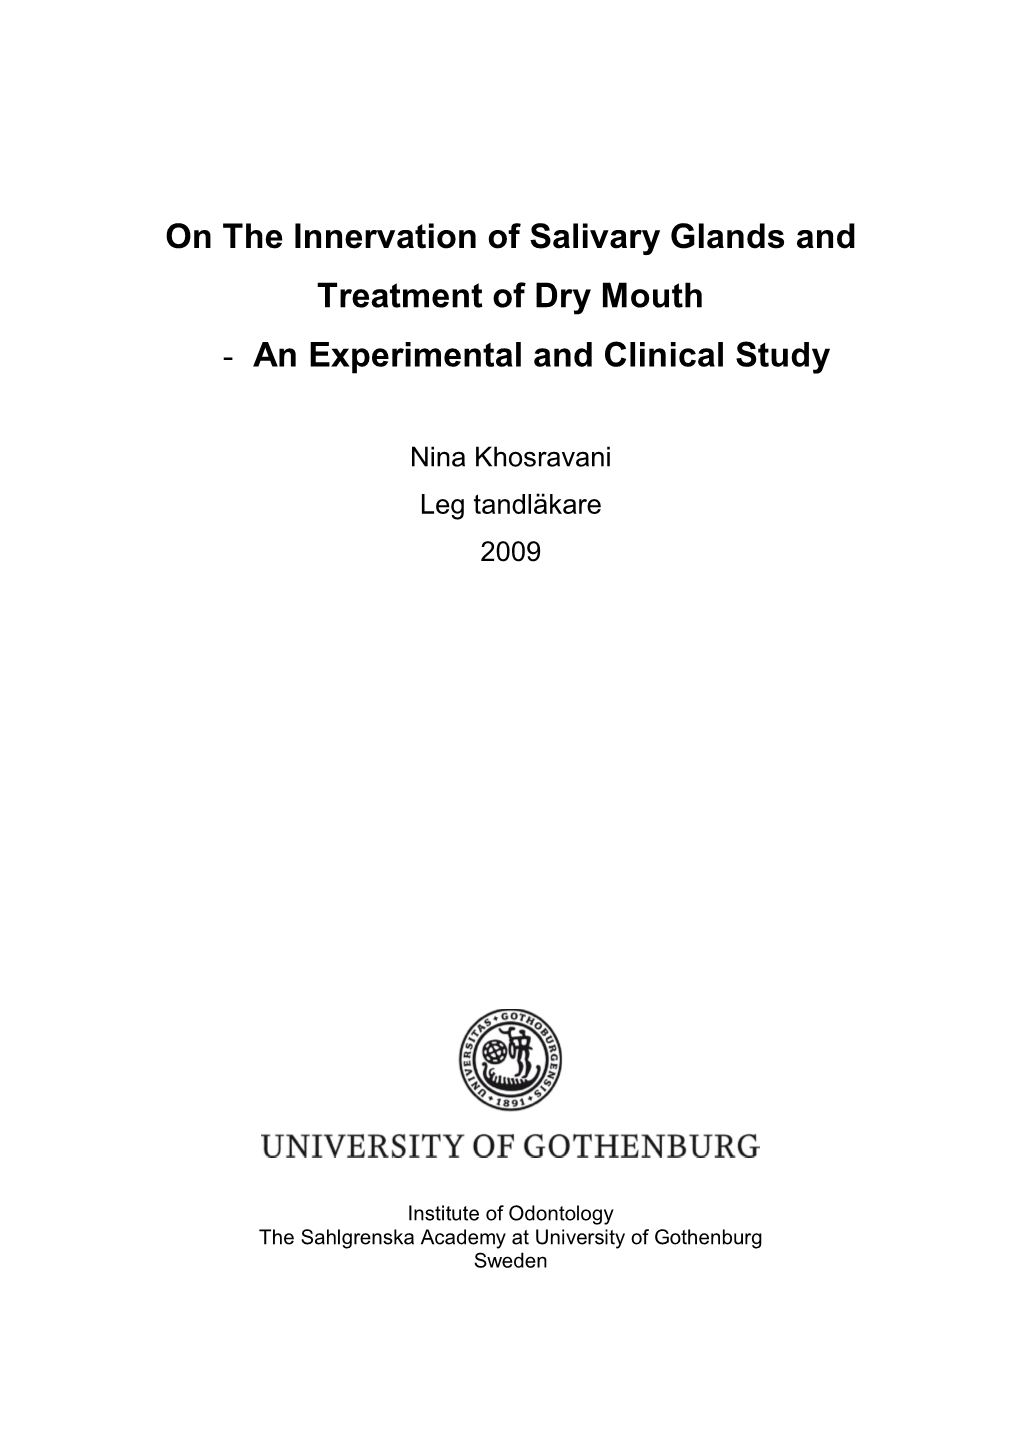 On the Innervation of Salivary Glands and Treatment of Dry Mouth - an Experimental and Clinical Study